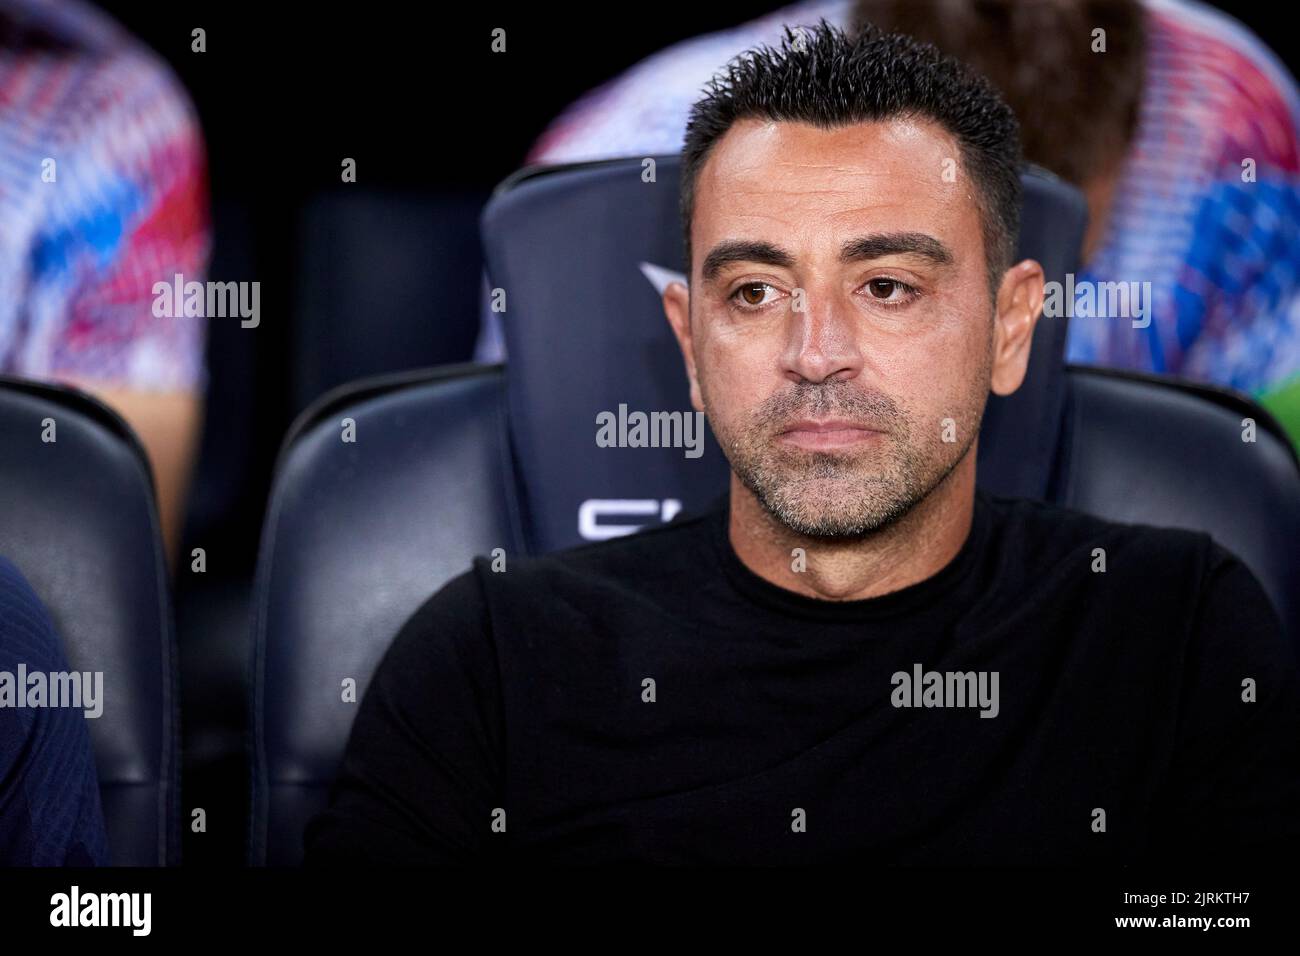 BARCELONA, SPAIN - AUGUST 24: Xavi Hernandez Head coach of FC Barcelona looks on prior the Charity for ELA match between FC Barcelona and Manchester City on August 24, 2022 at Spotify Camp Nou in Barcelona, Spain. Credit: Ricardo Larreina/AFLO/Alamy Live News Stock Photo